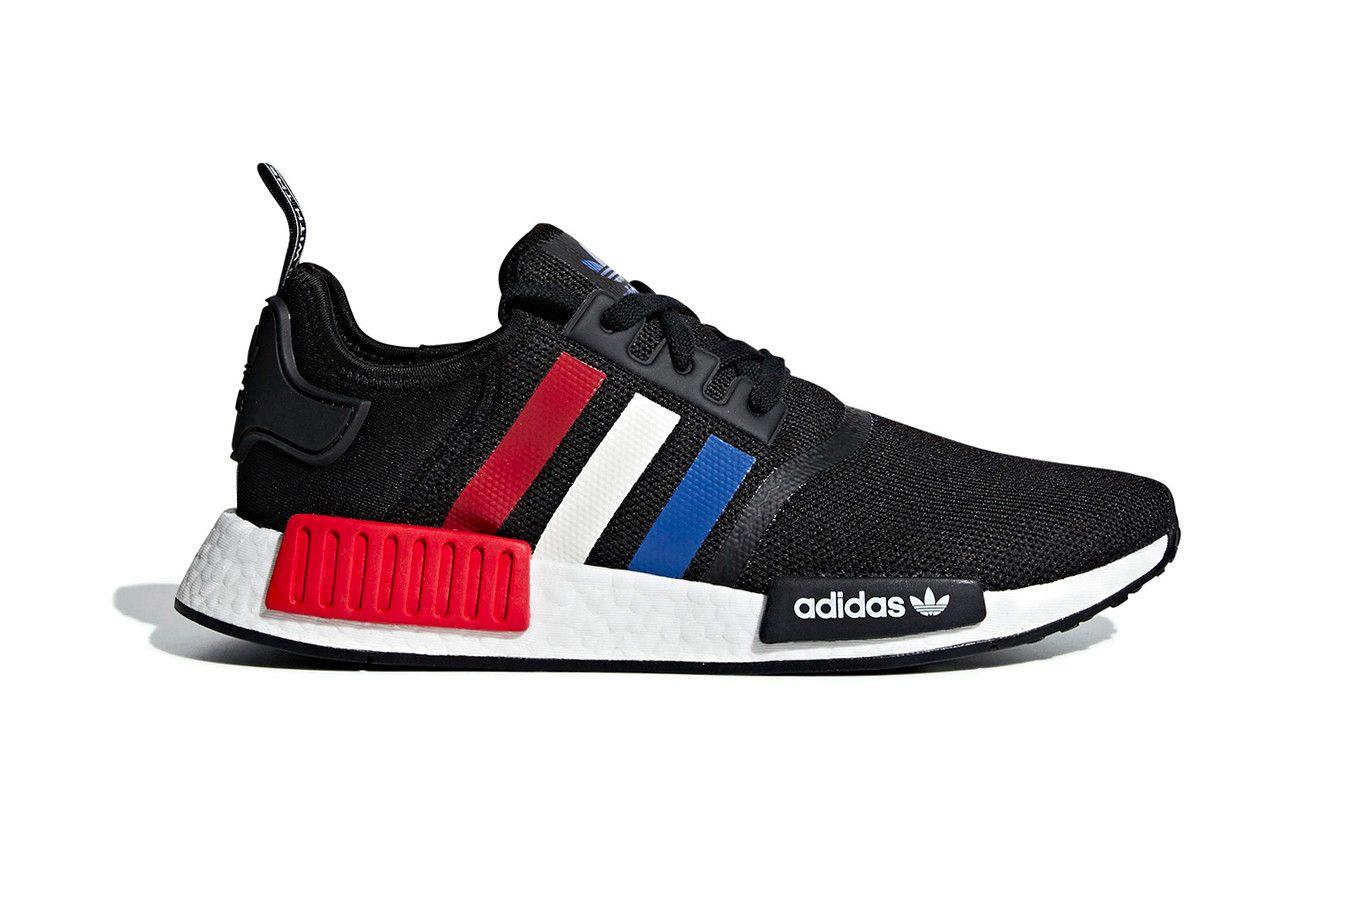 Red White and Blue Stripes Logo - Red, White And Blue Stripes Land On The adidas NMD R1 • KicksOnFire.com